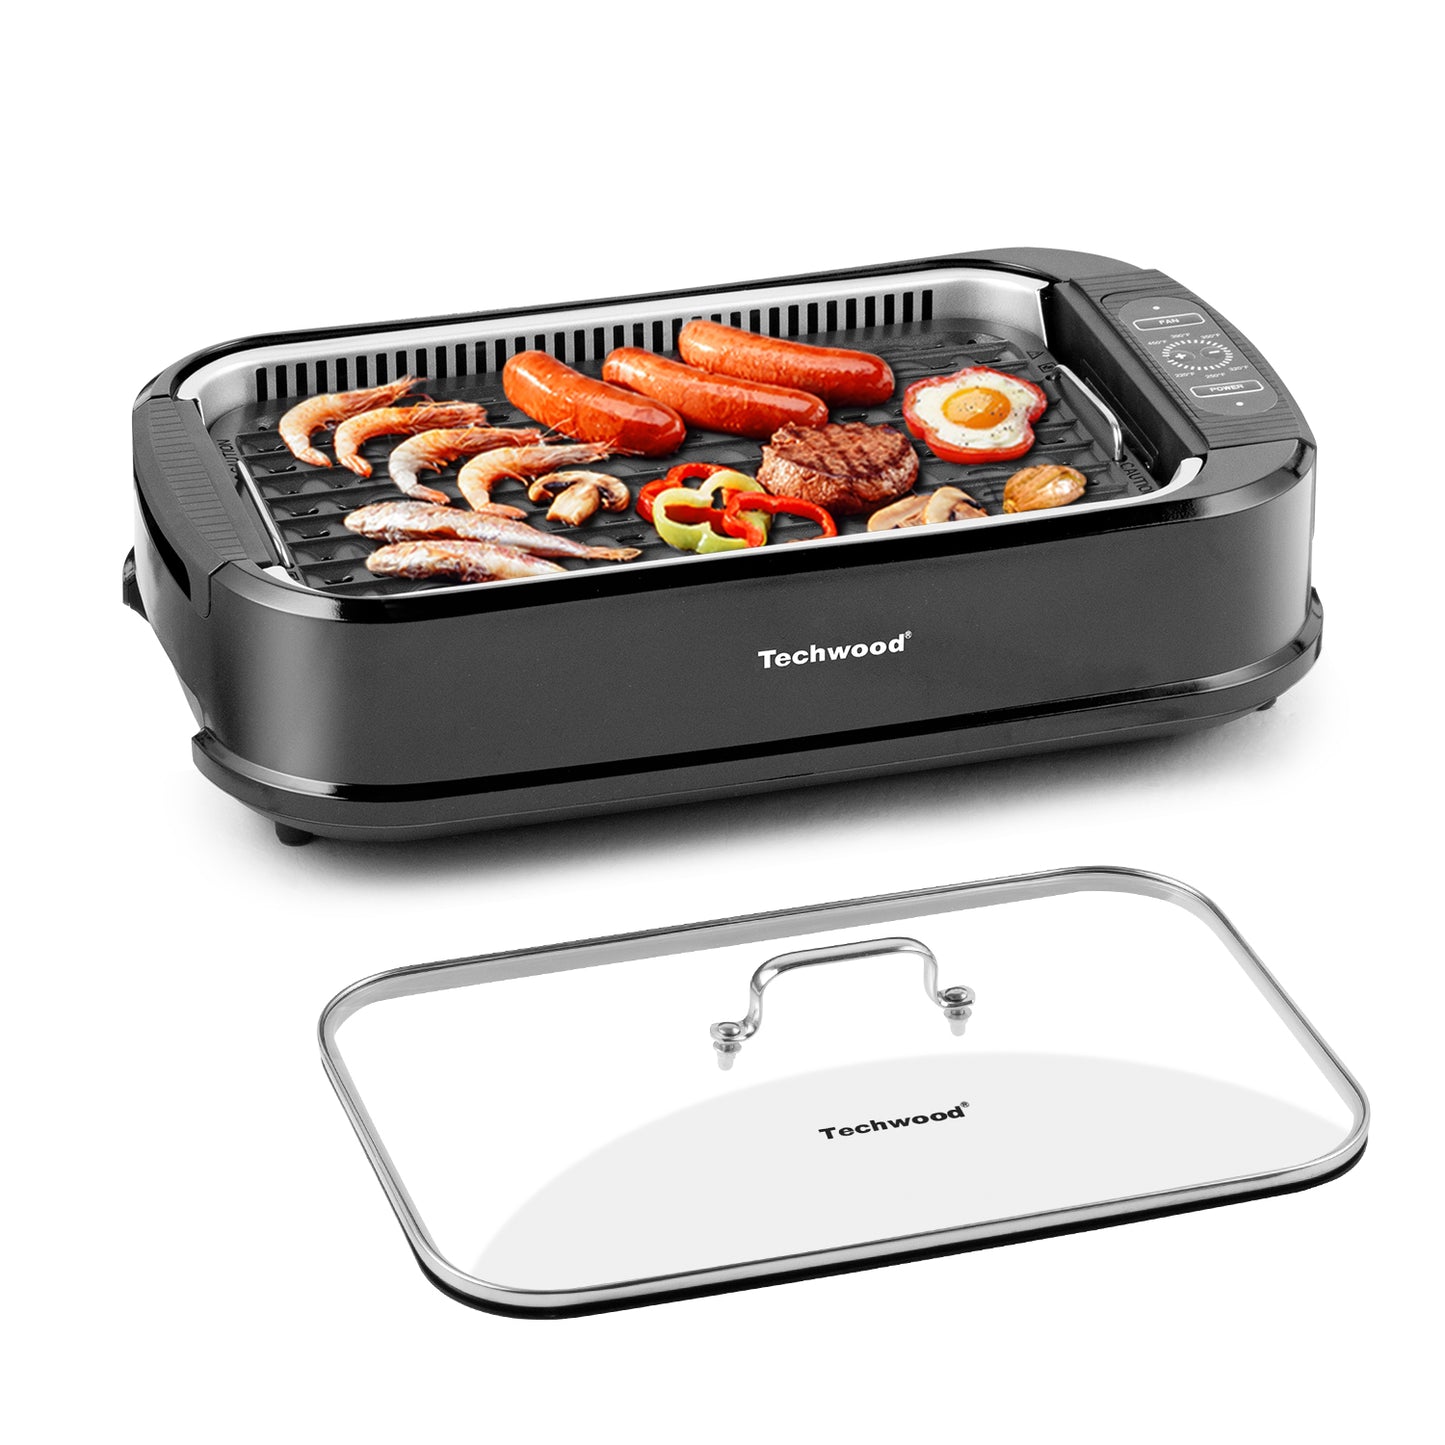 AS SEEN ON TV Smokeless Indoor Electric Grill POWER 1500 Watts Non-Stick BBQ